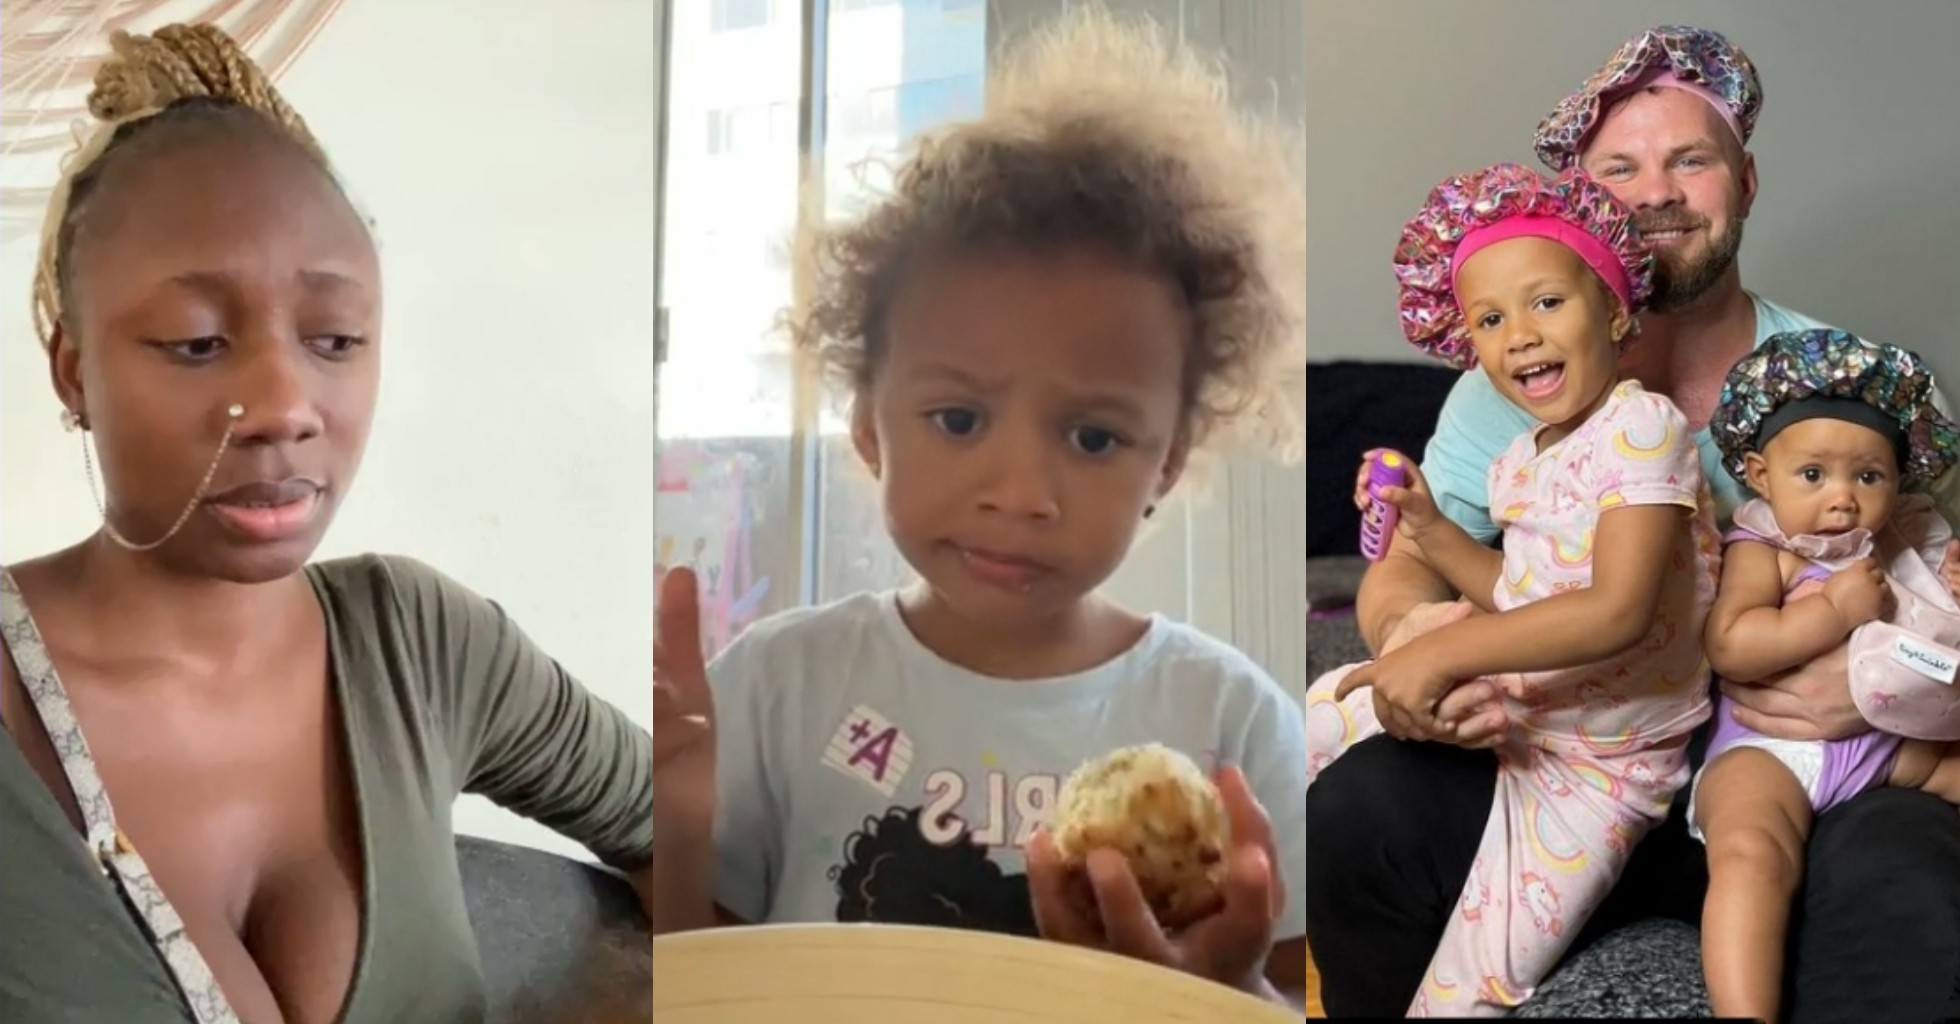 VIDEO: Korra Obidi laments bitterly over daughter June’s dismissal from school, drags ex-hubby Justin Dean